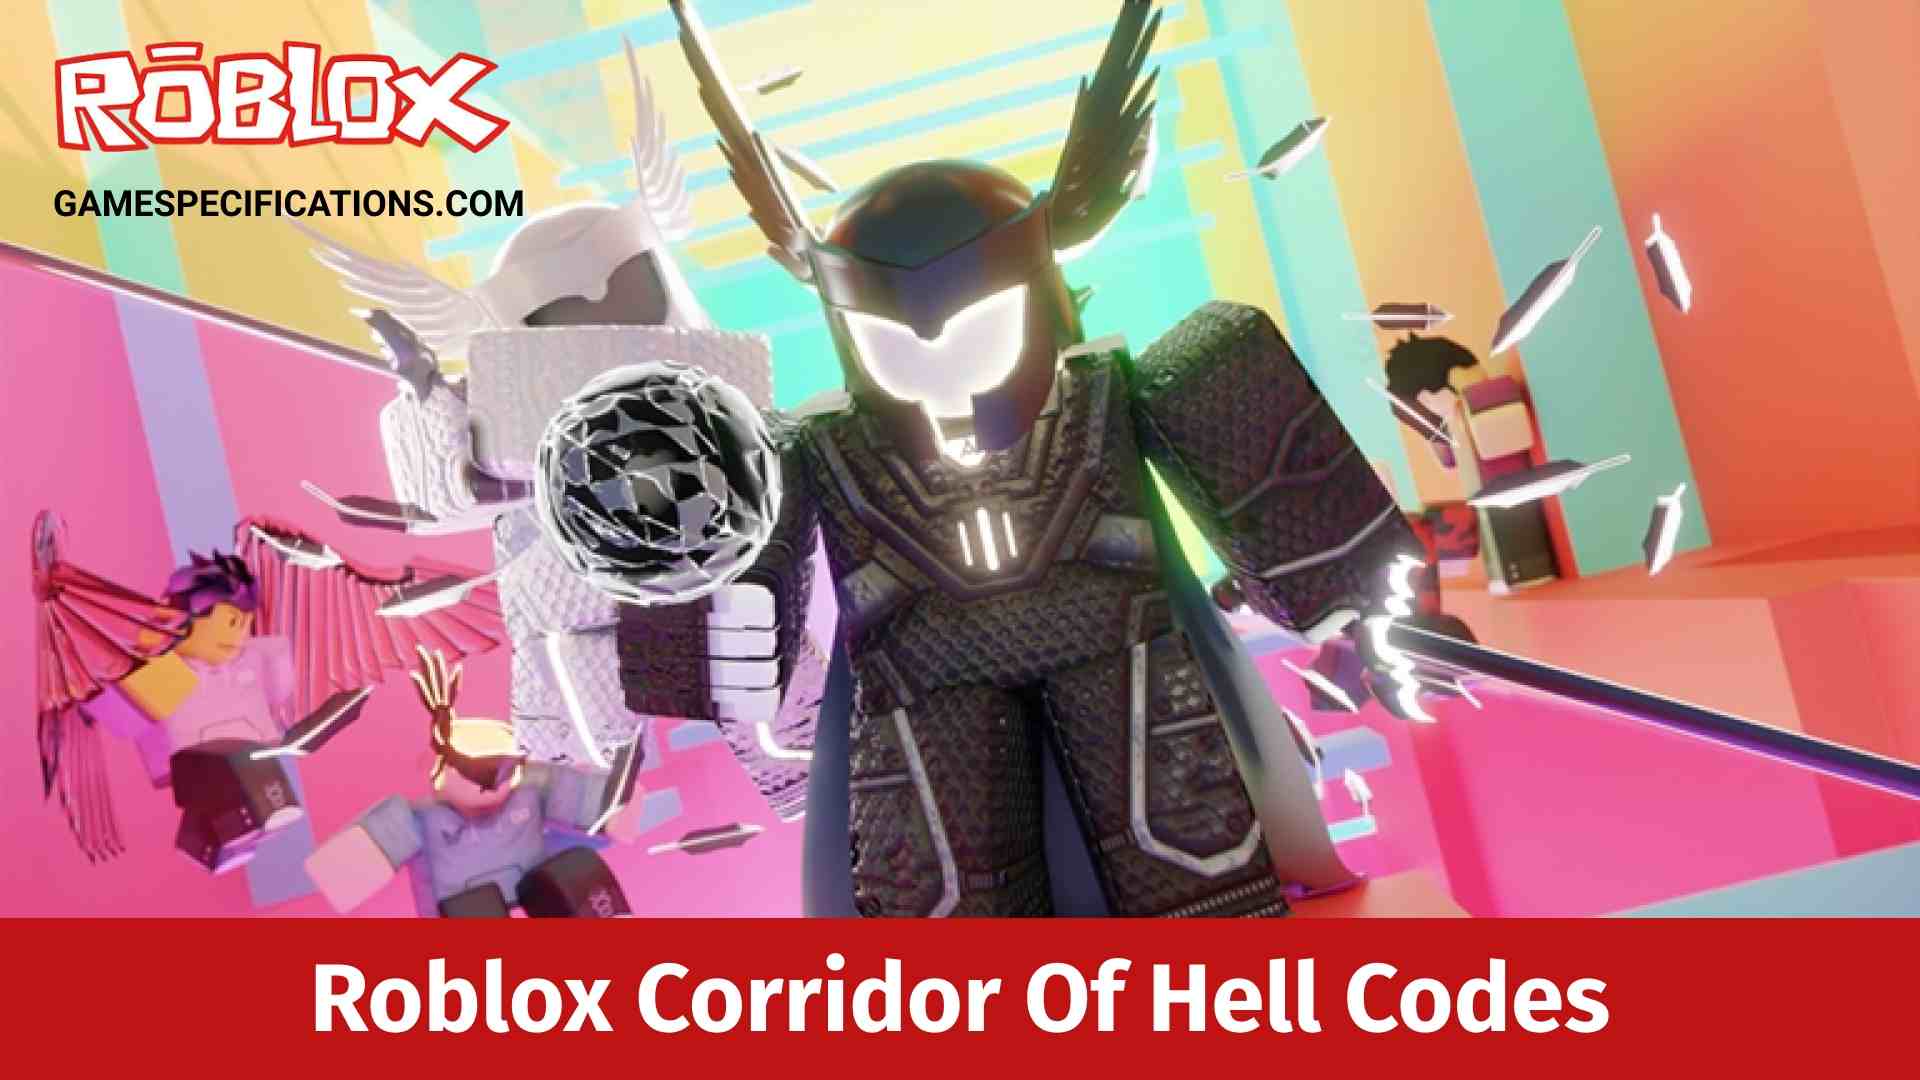 Roblox Corridor Of Hell Codes July 2021 Game Specifications - roblox deadly sins retribution codes